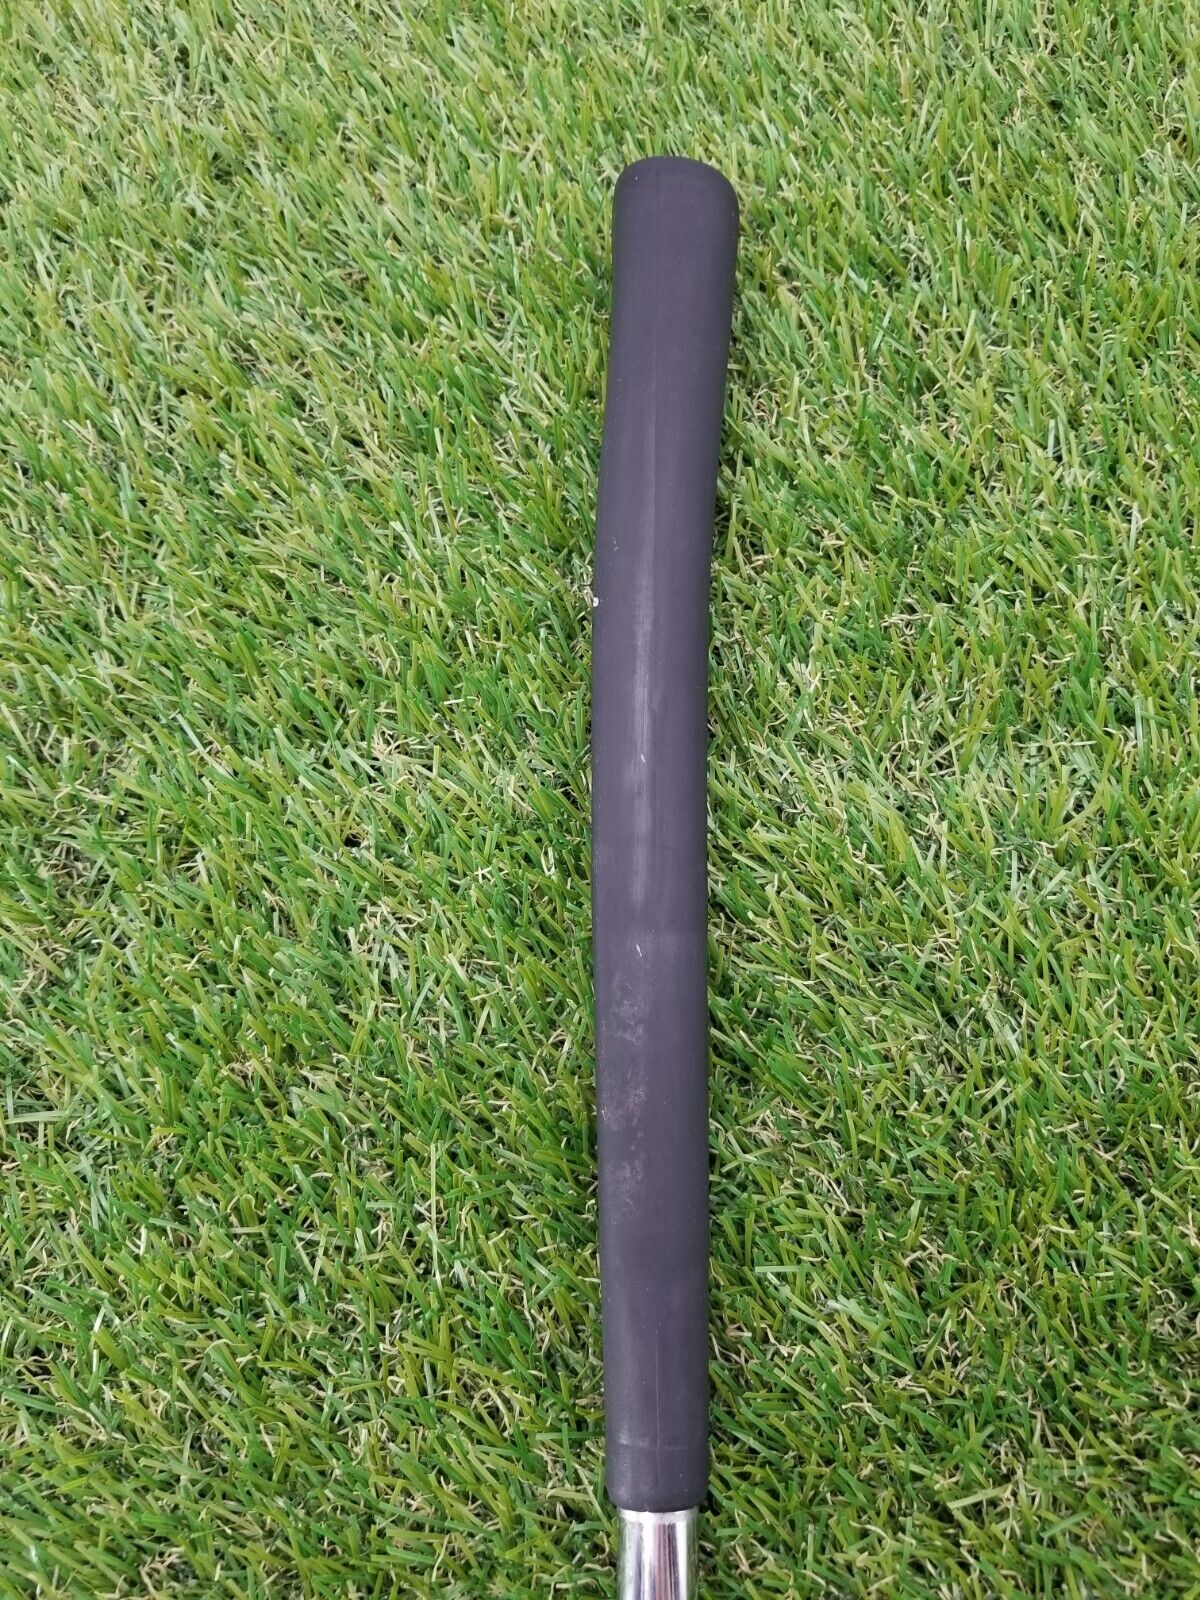 PING ANSER 2 "TOM HARMON FRIEND OF GOLF" PUTTER PING GRIP  35" !RARE! VERYGOOD